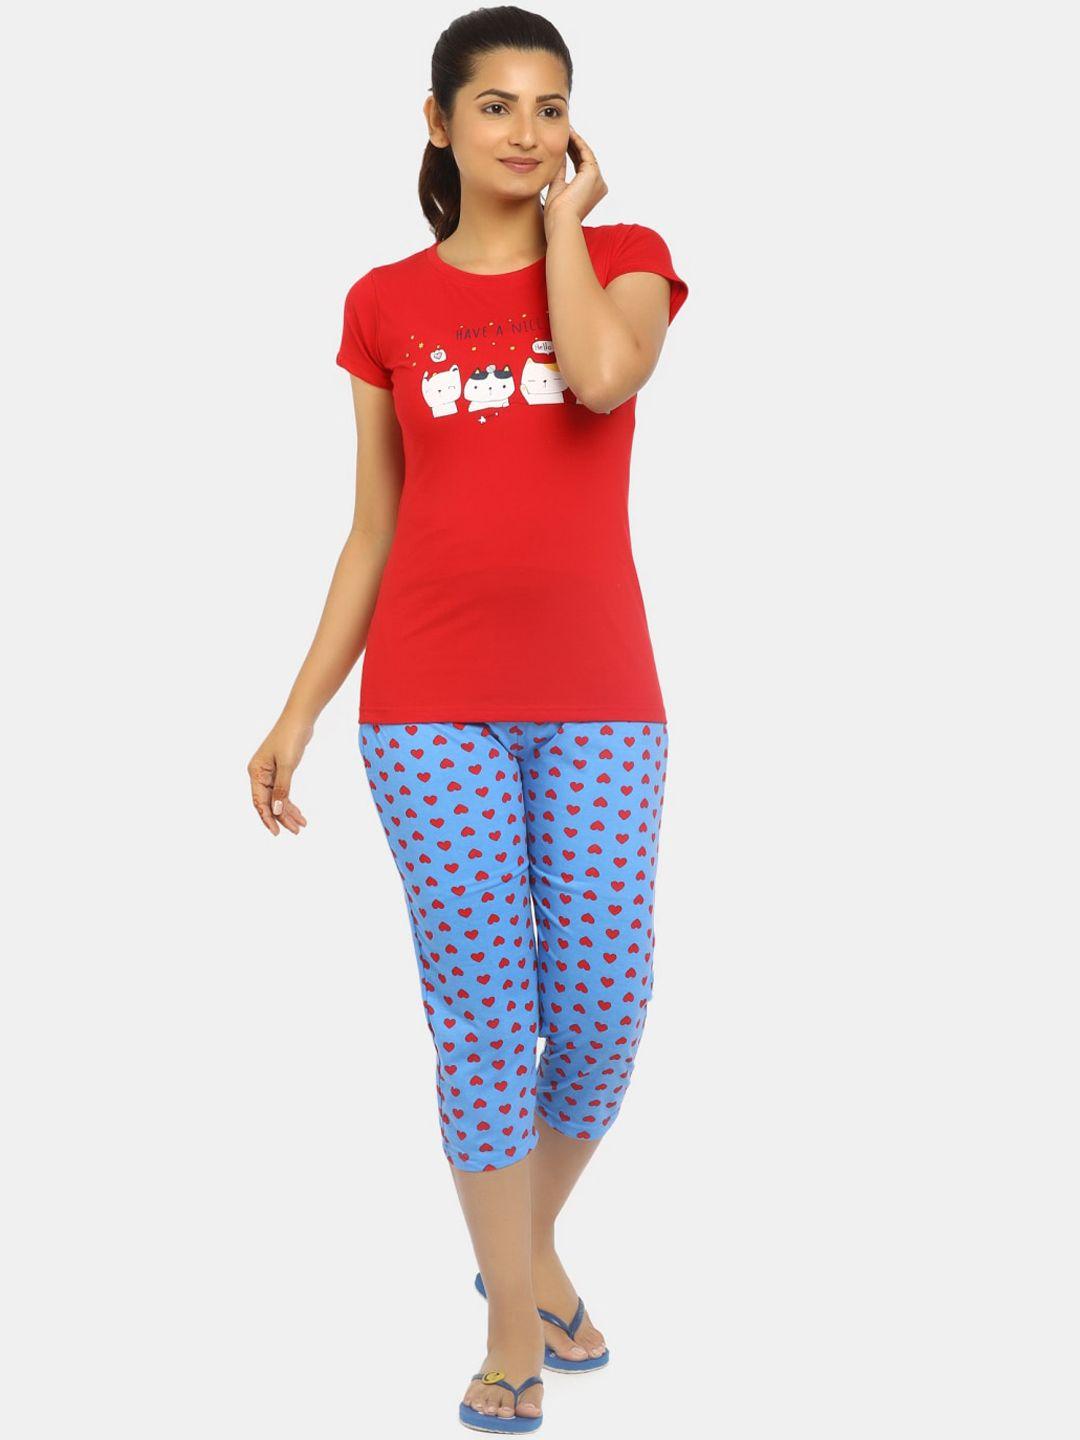 v-mart-women-red-&-blue-printed-night-suit